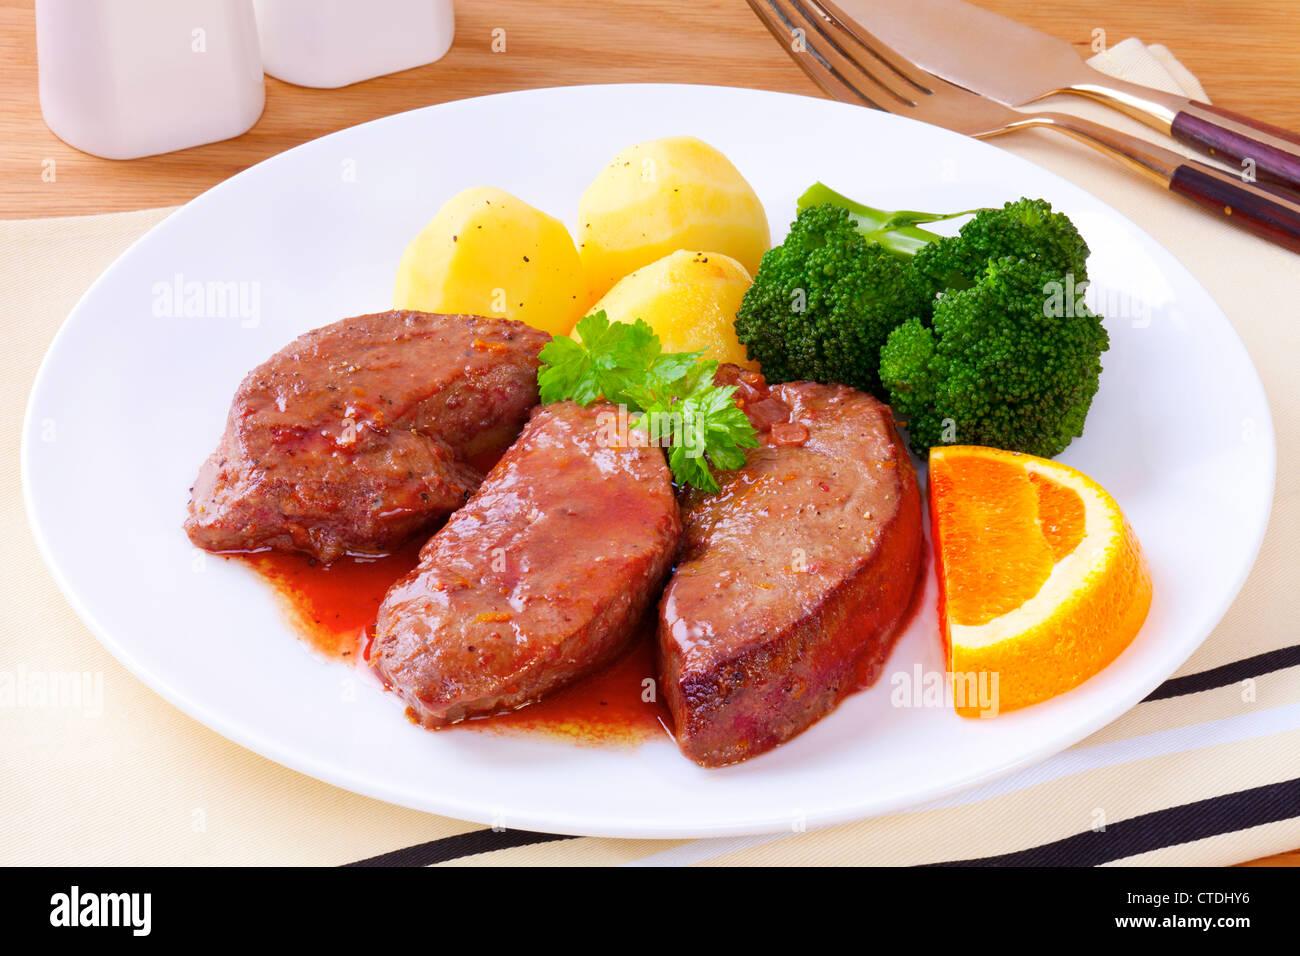 Lamb's liver or lamb fry, cooked in a sauce made from wine and orange, served with new potatoes and broccoli. Stock Photo